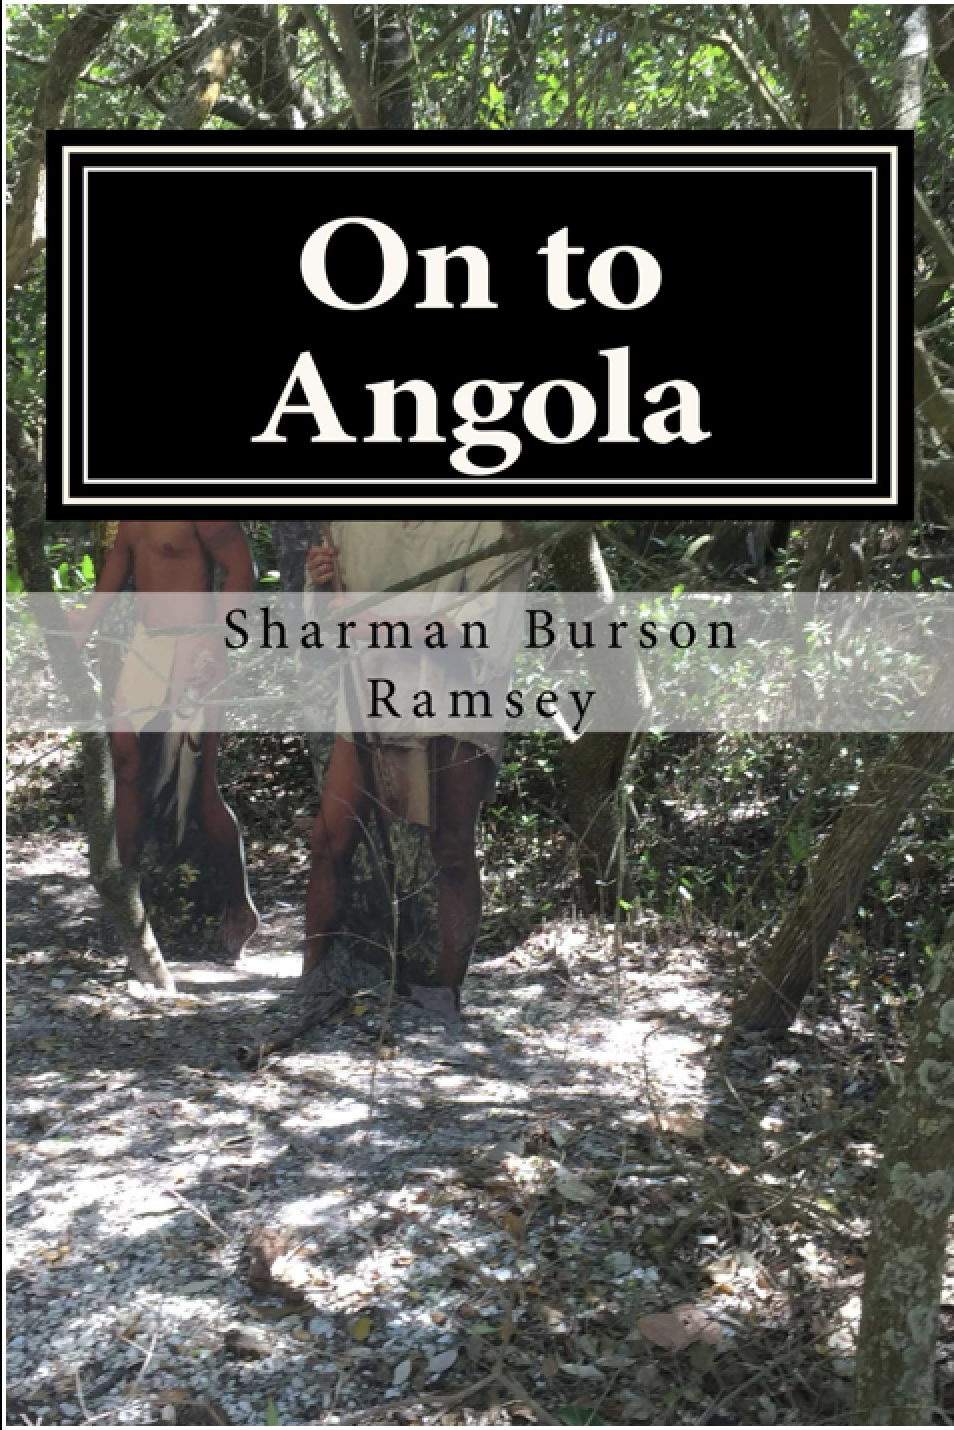 ON TO ANGOLA: RACE TO FREEDOM